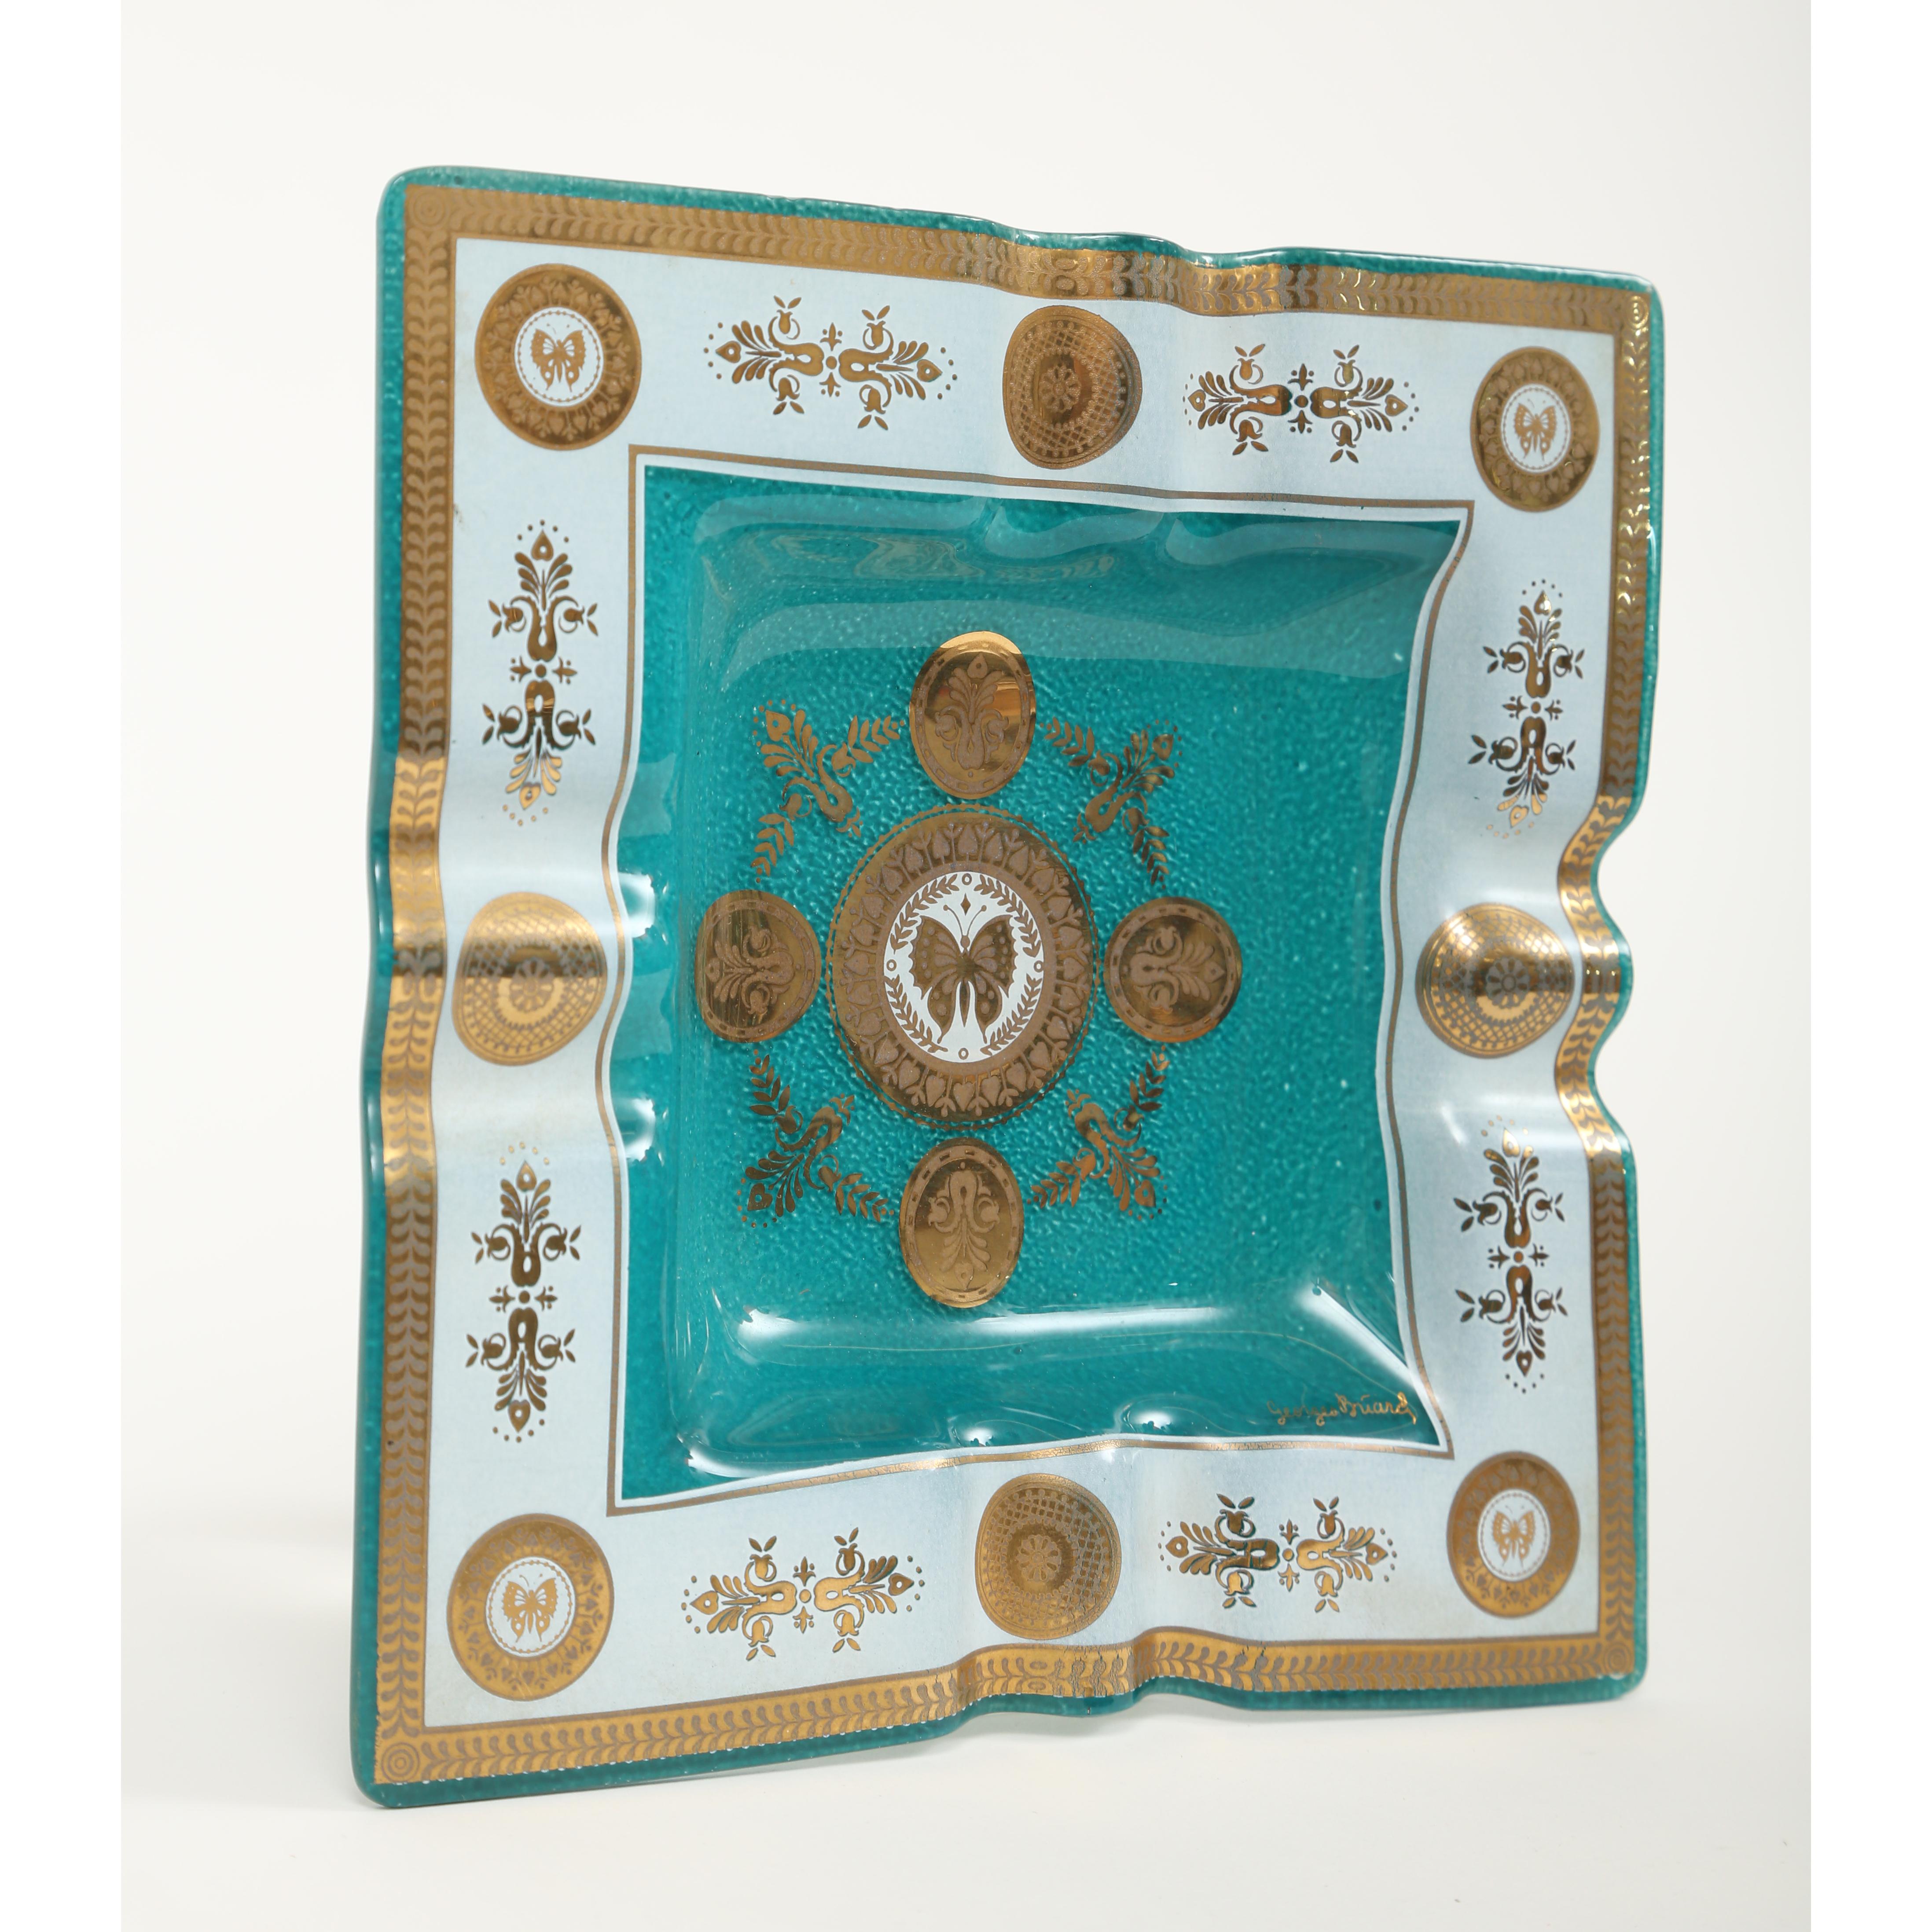 Georges Briard square tray in the embassy pattern. The color is actually an emerald green with white and 22-karat gold decoration. The wide border has a laurel wreath pattern and gold medallions of butterflies. The butterfly motif appears again in